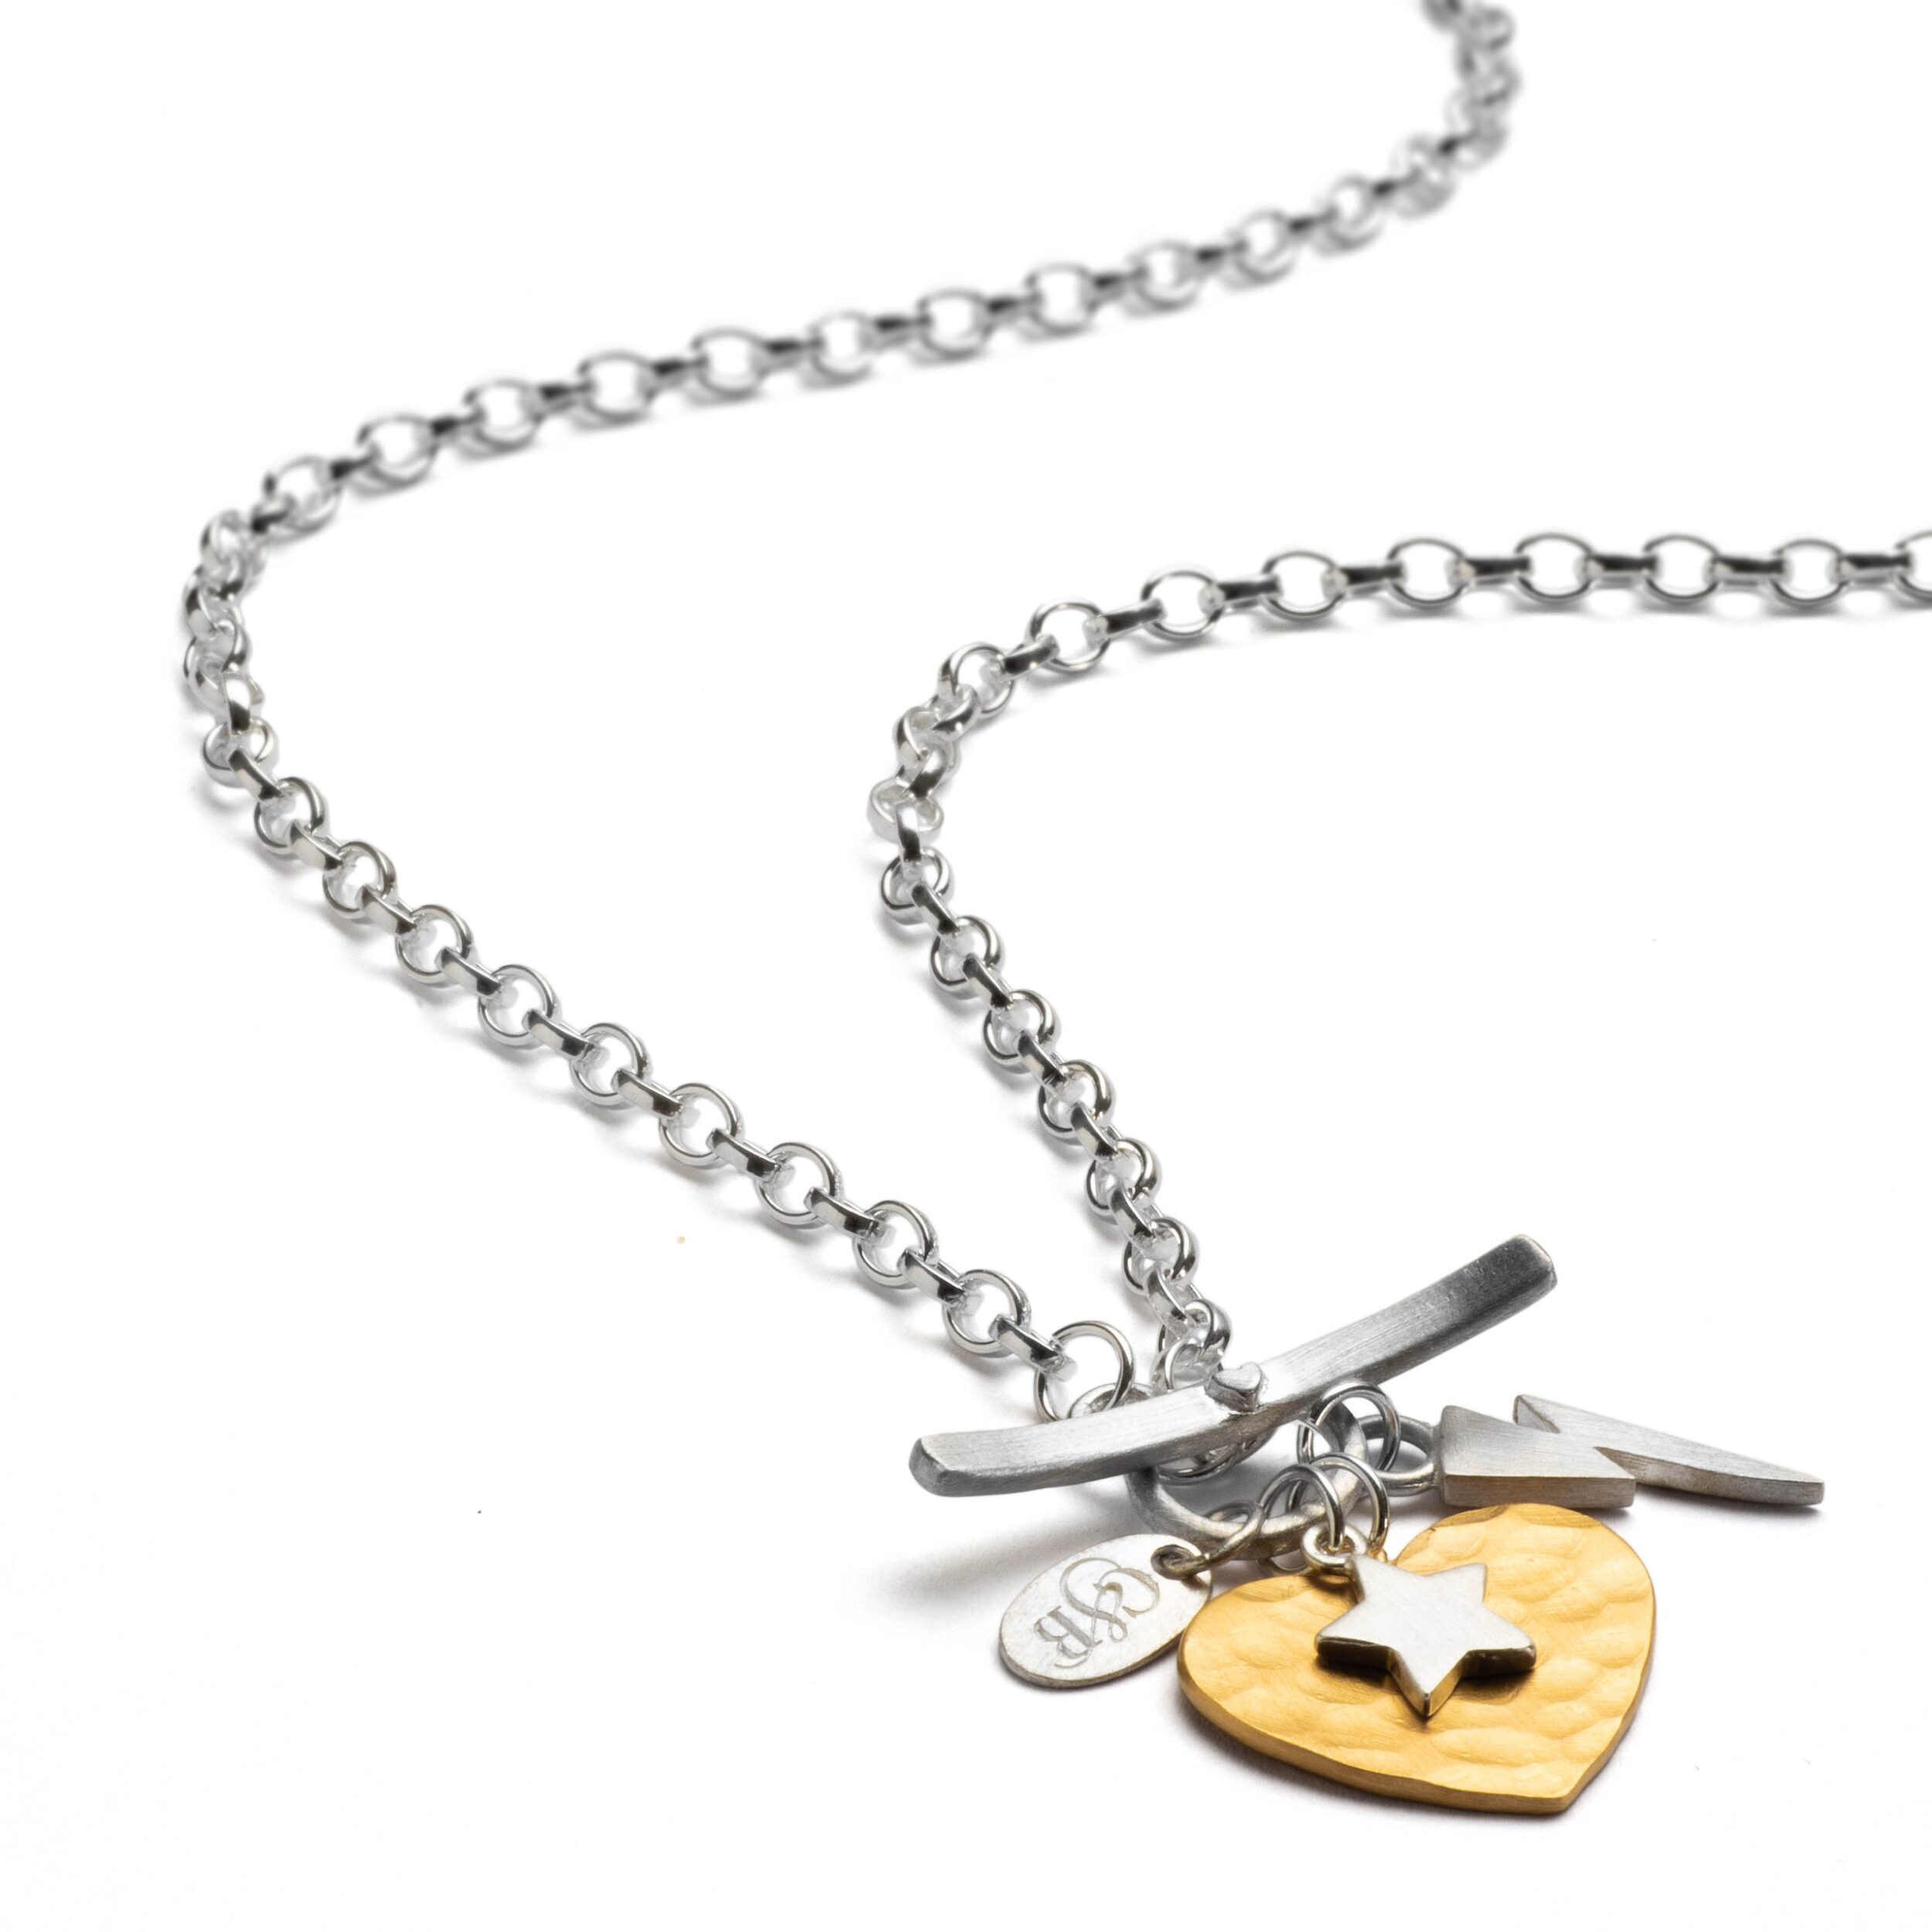 sterling silver charm necklace with gold heart